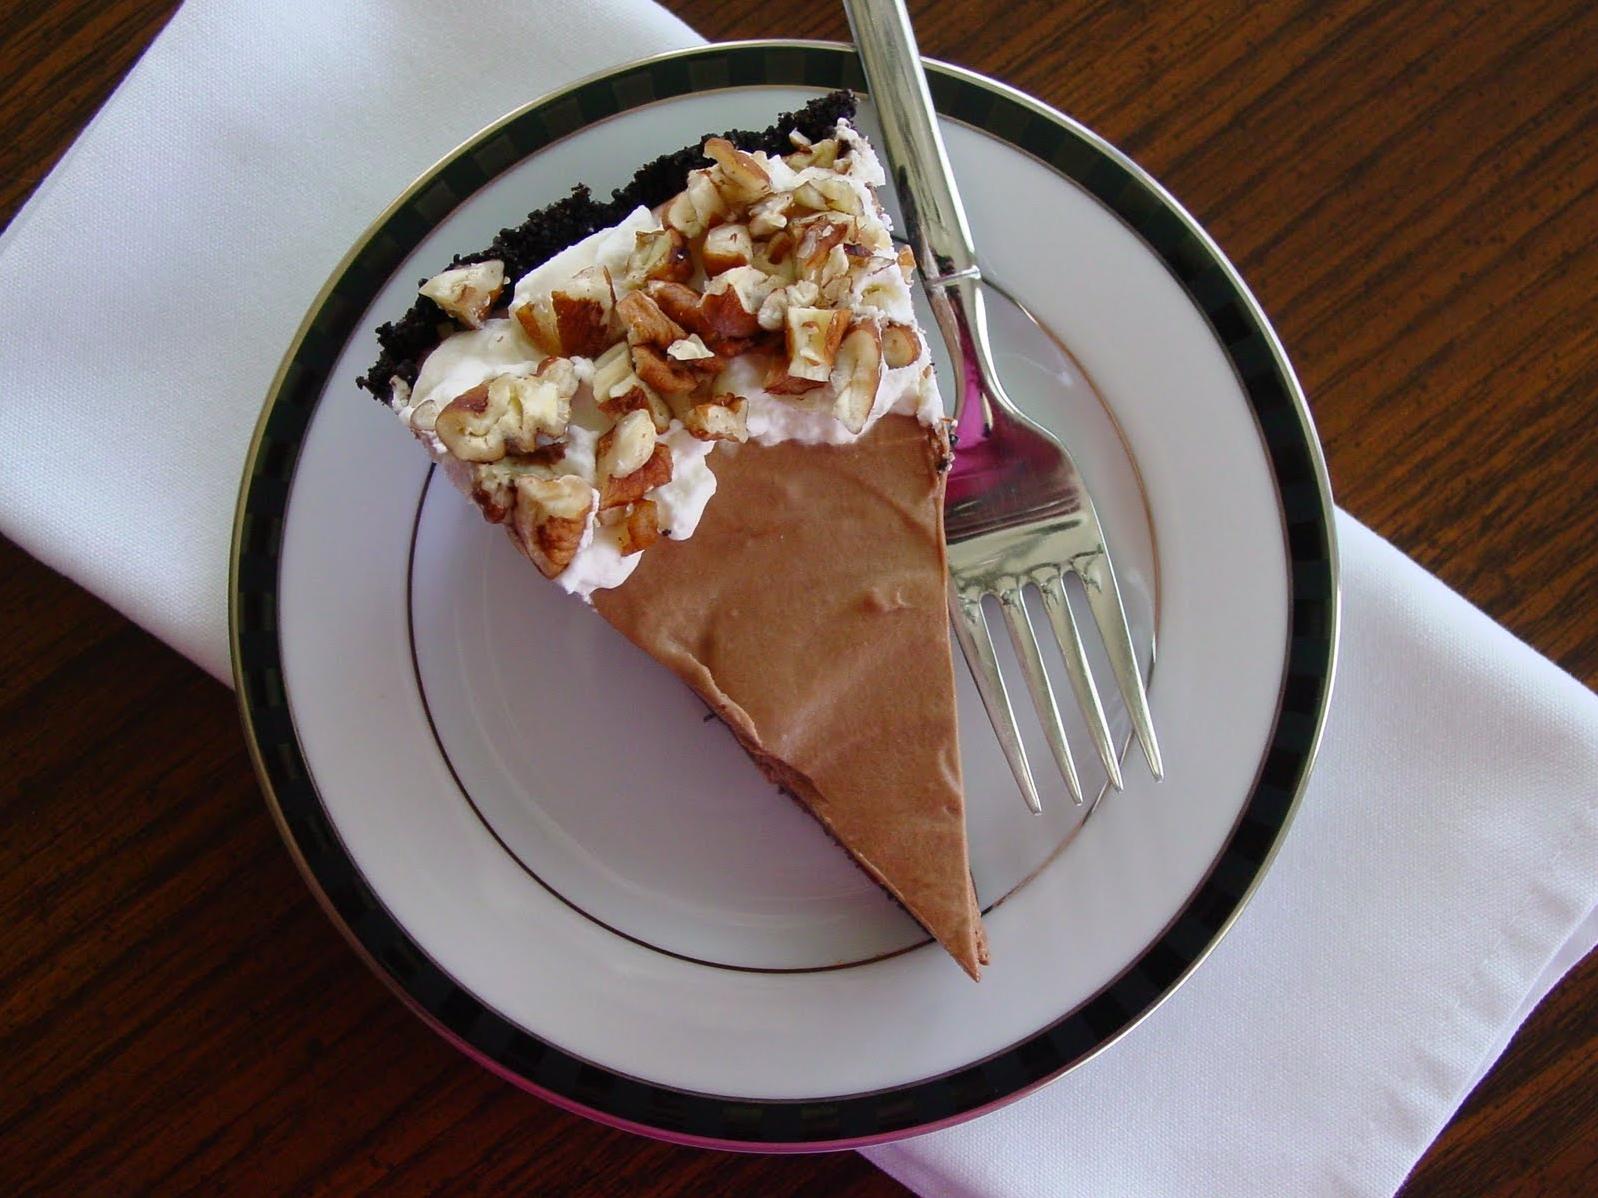  This Mocha Frappe Pie is the perfect way to indulge and unwind after a long day.